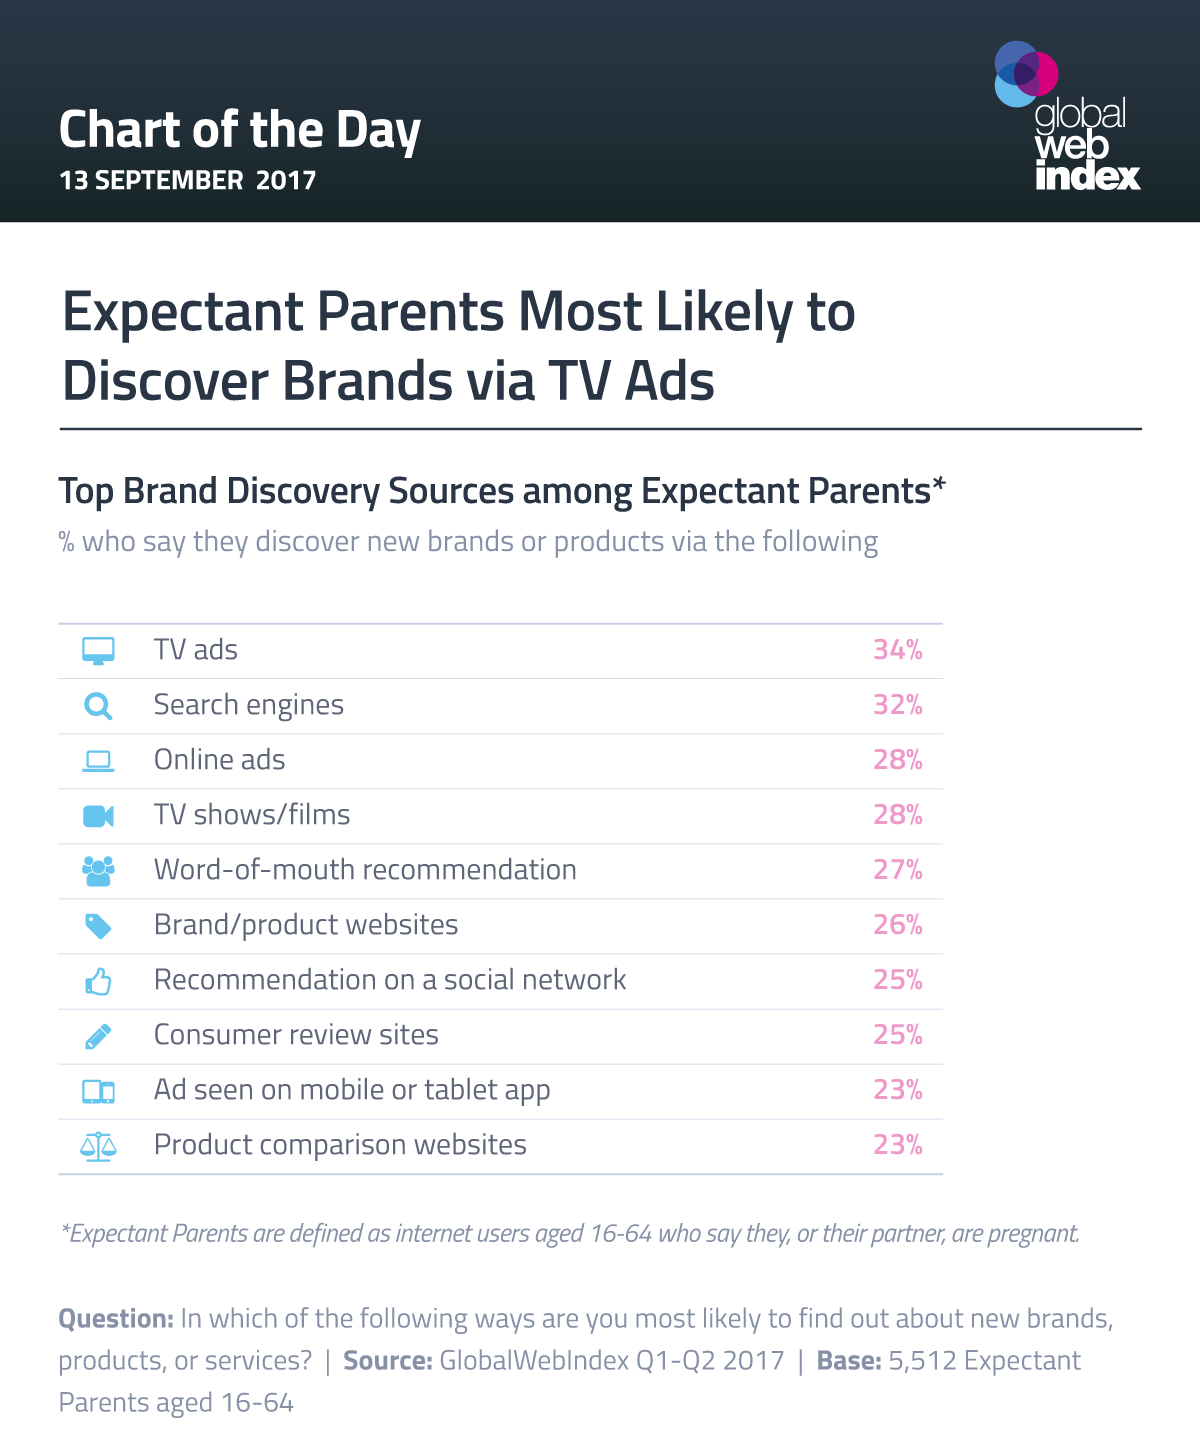 Expectant Parents Most Likely to Discover Brands via TV Ads